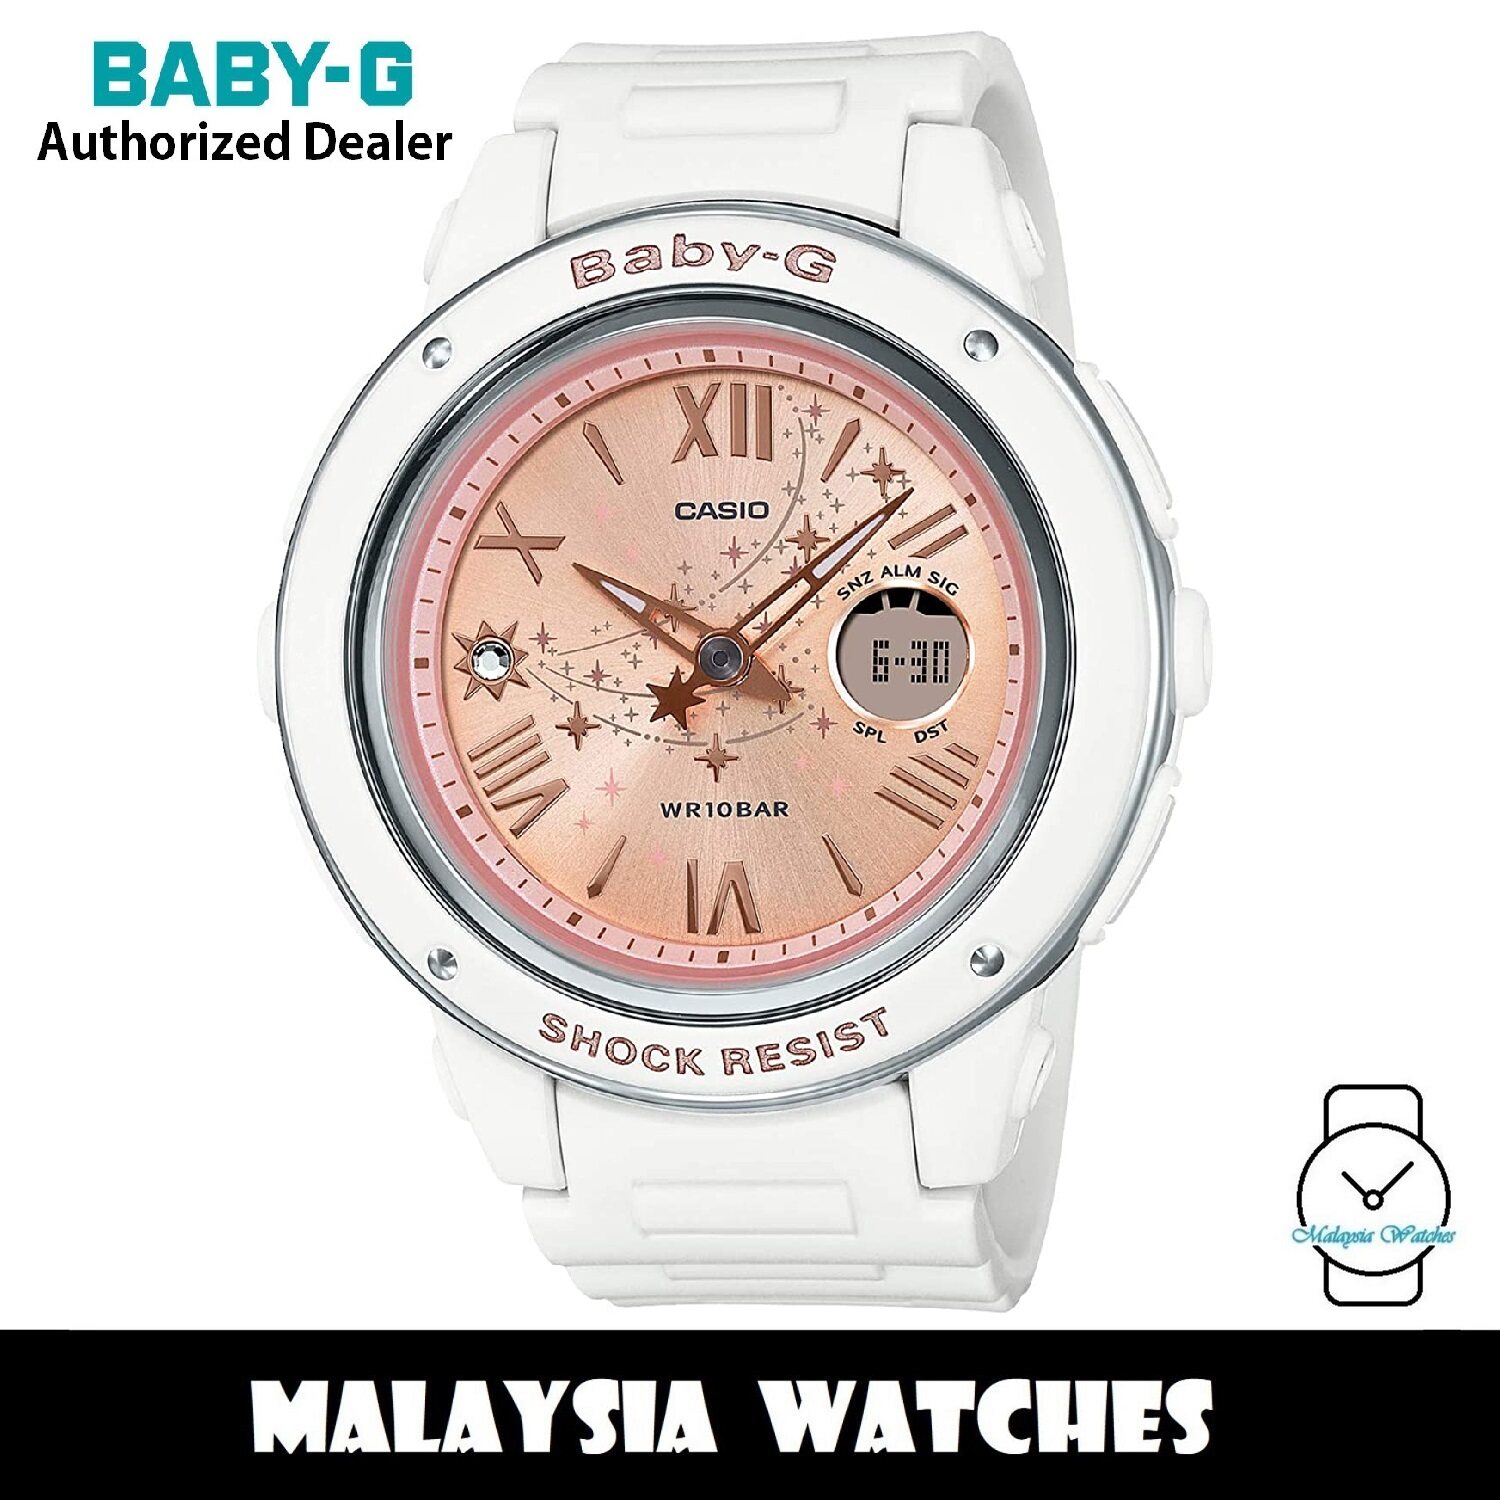 OFFICIAL WARRANTY) Casio Baby-G BGA-150ST-7A Shooting Star Series